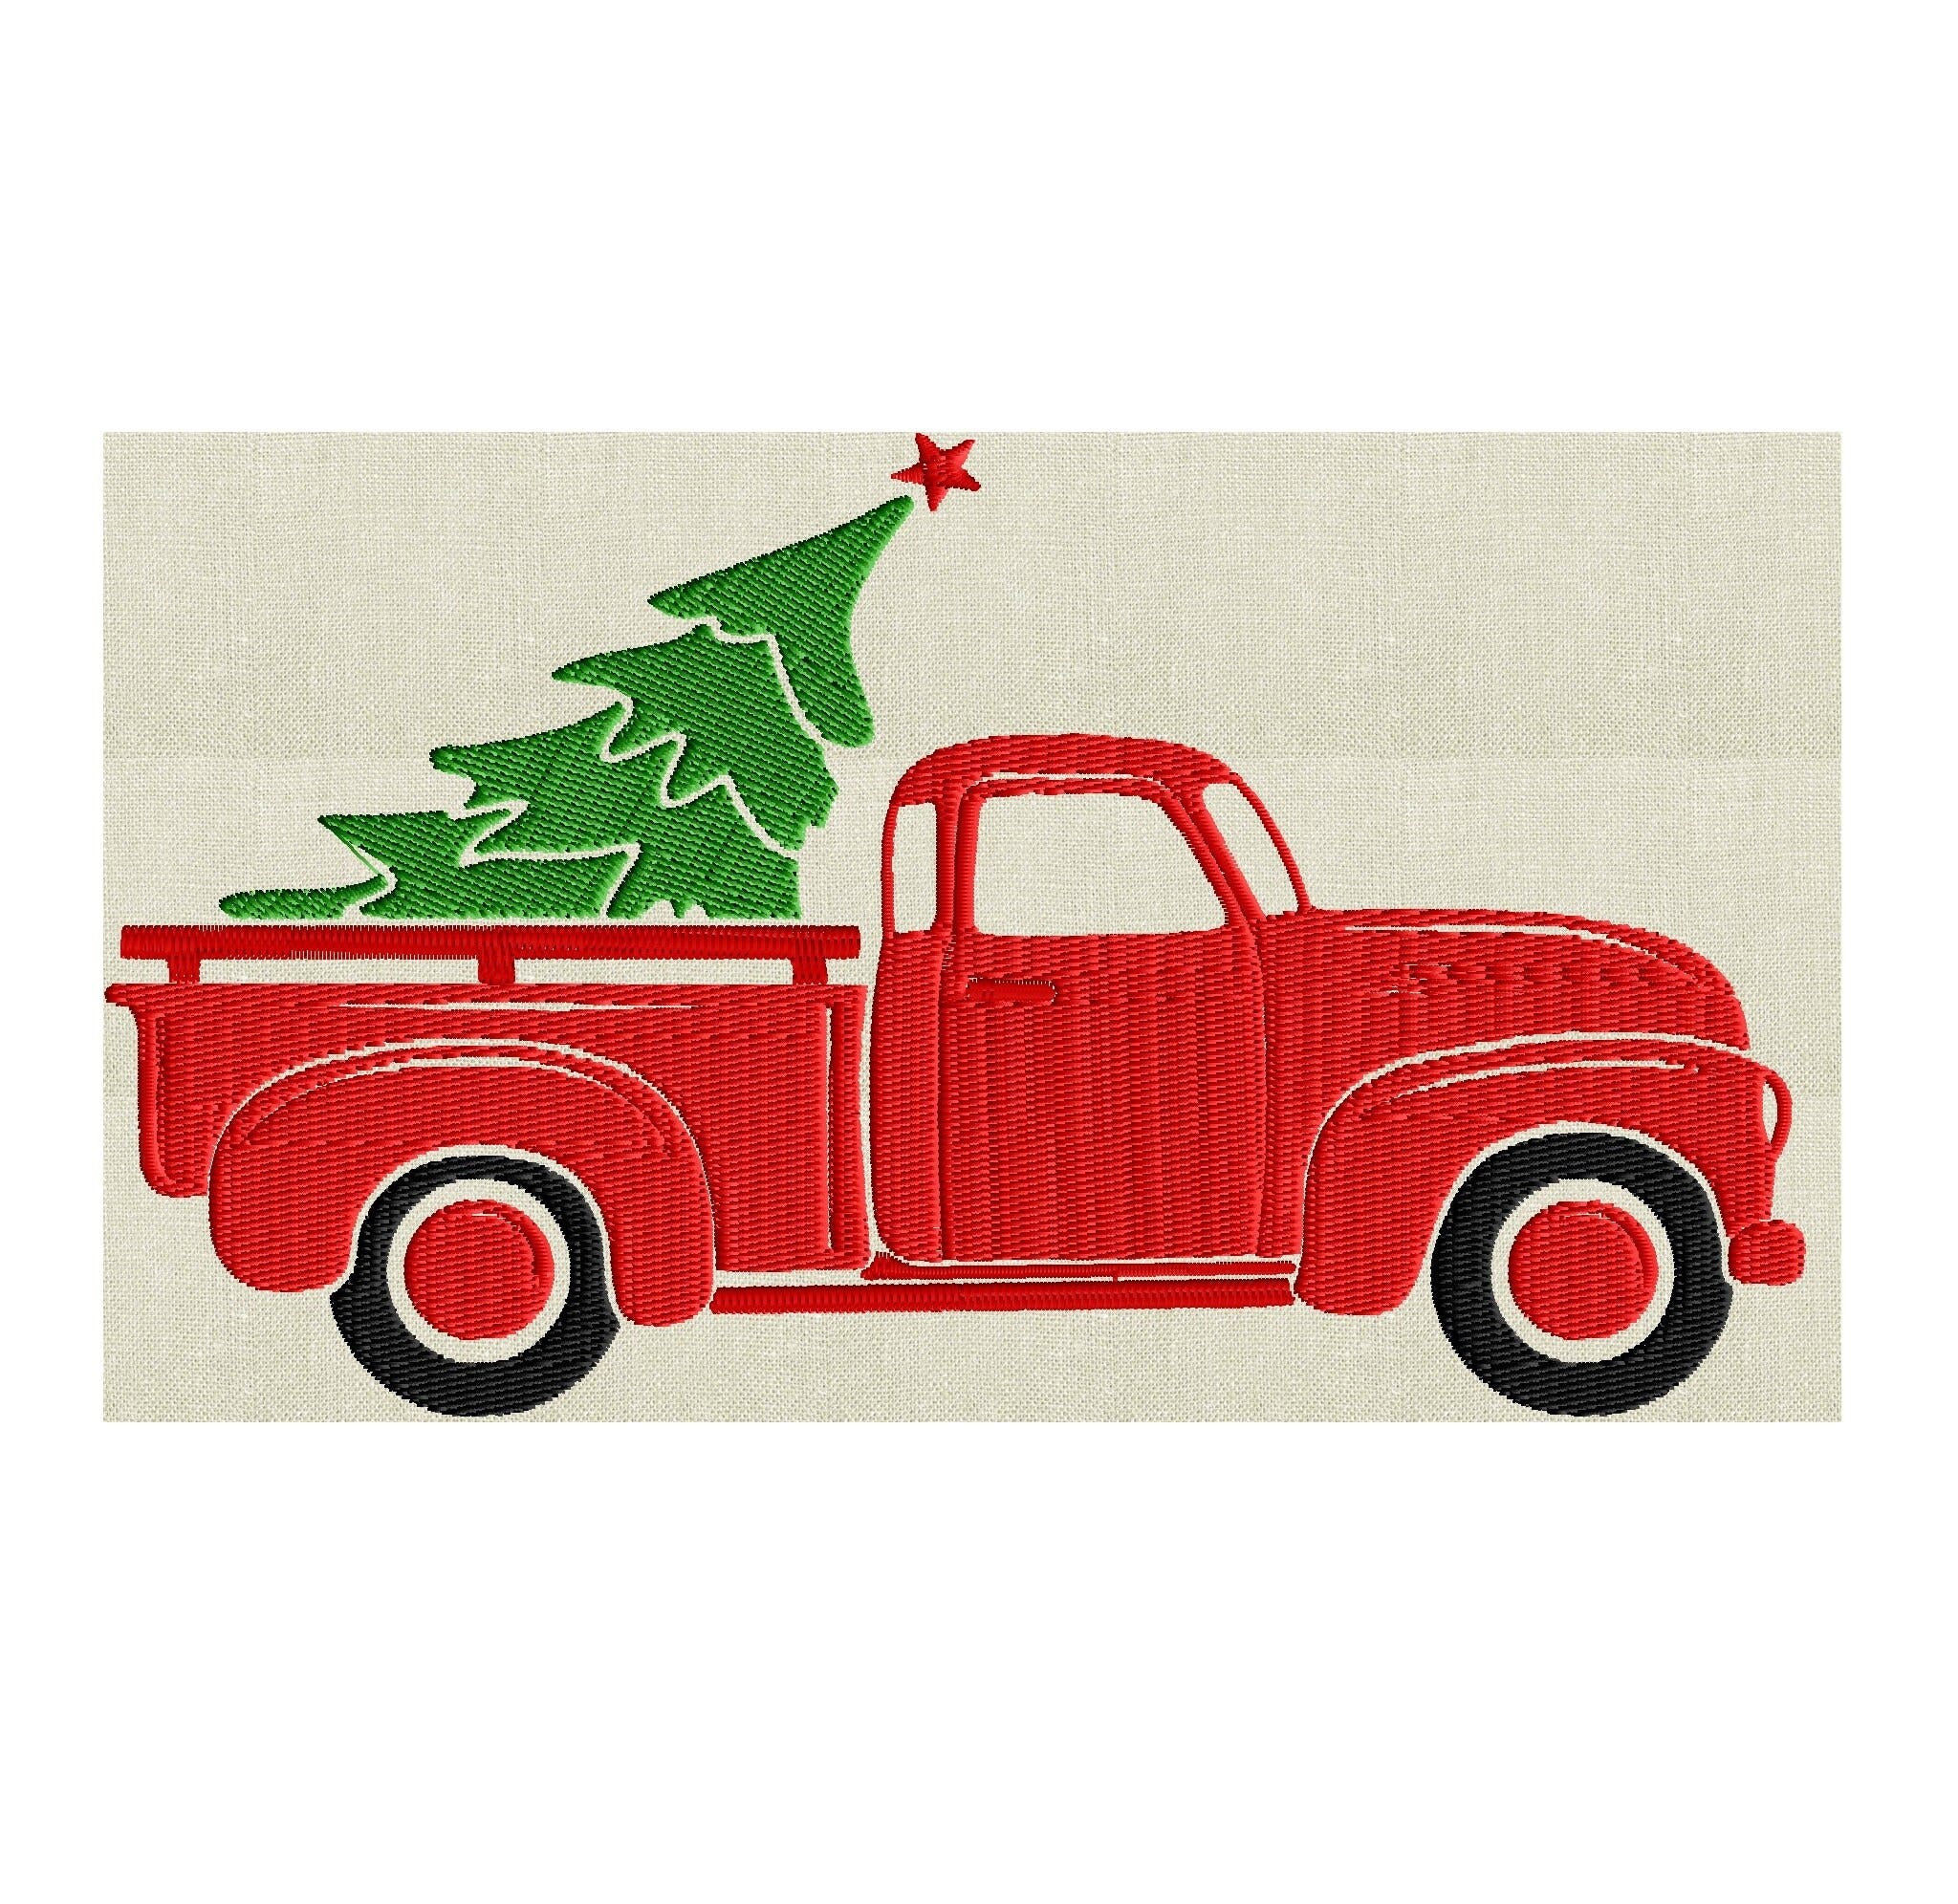 Retro Pickup truck with Christmas Tree - EMBROIDERY DESIGN file - Instant download - Hus Exp Jef Vp3 Pes Dst - 2 sizes